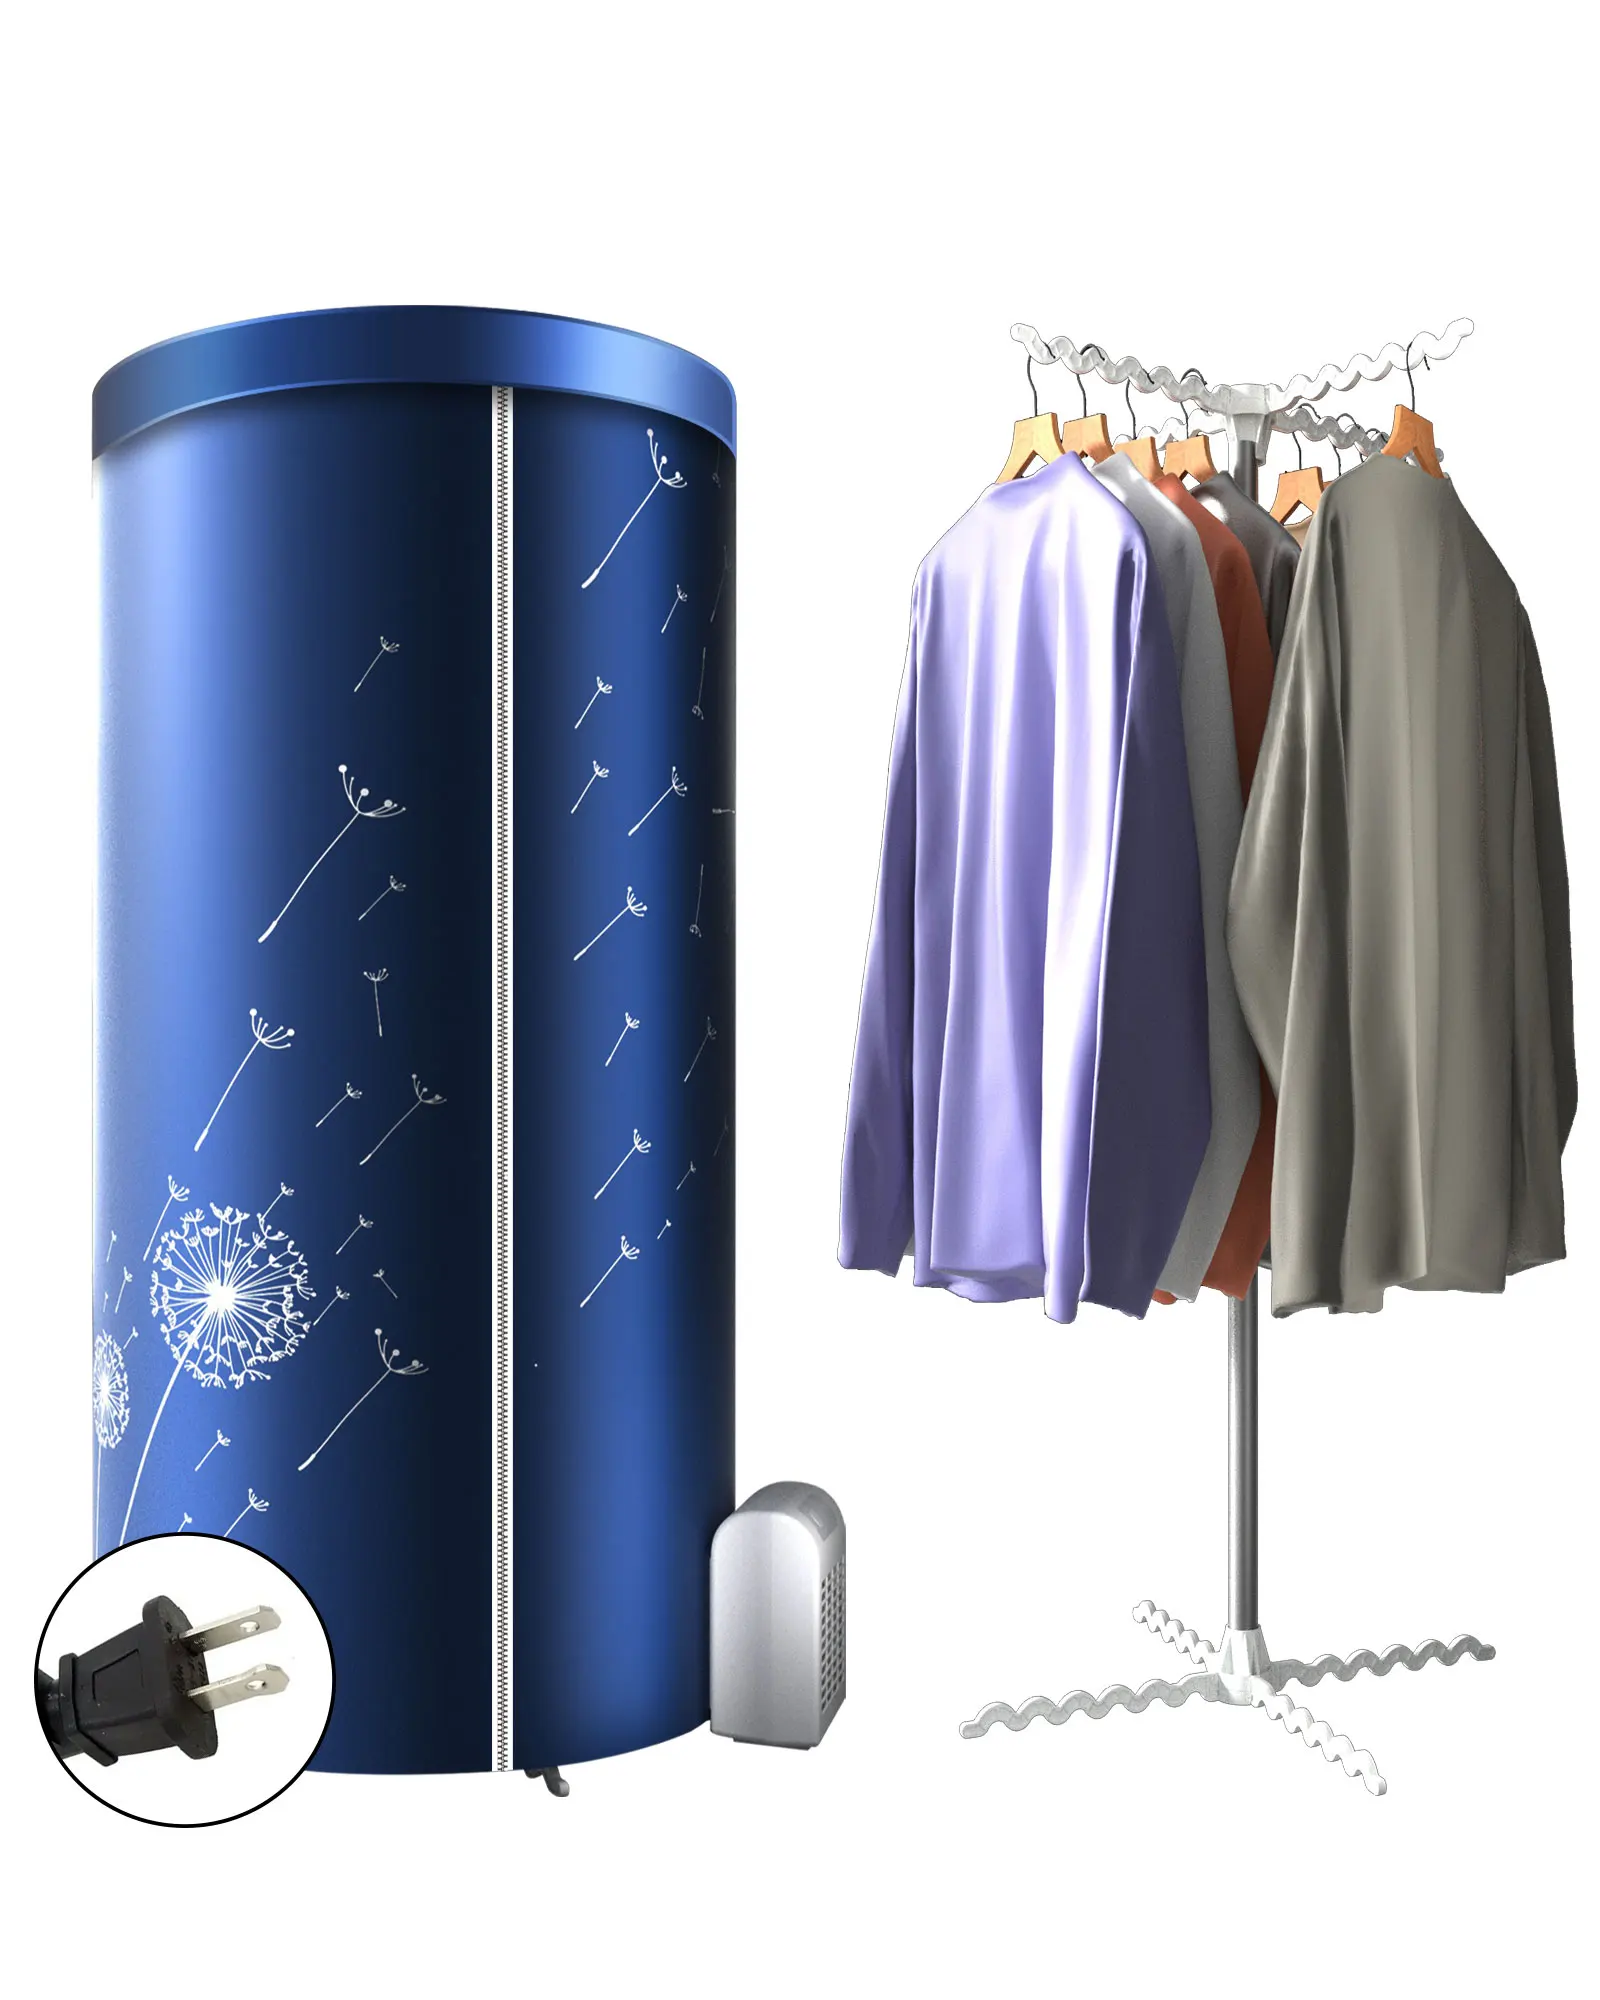 Portable Electric Clothes Dryer,110V - 1000W Heated Clothes Airer,Travel  Heated Clothes Dryer with Timer,Electric Clothes Dryer - AliExpress